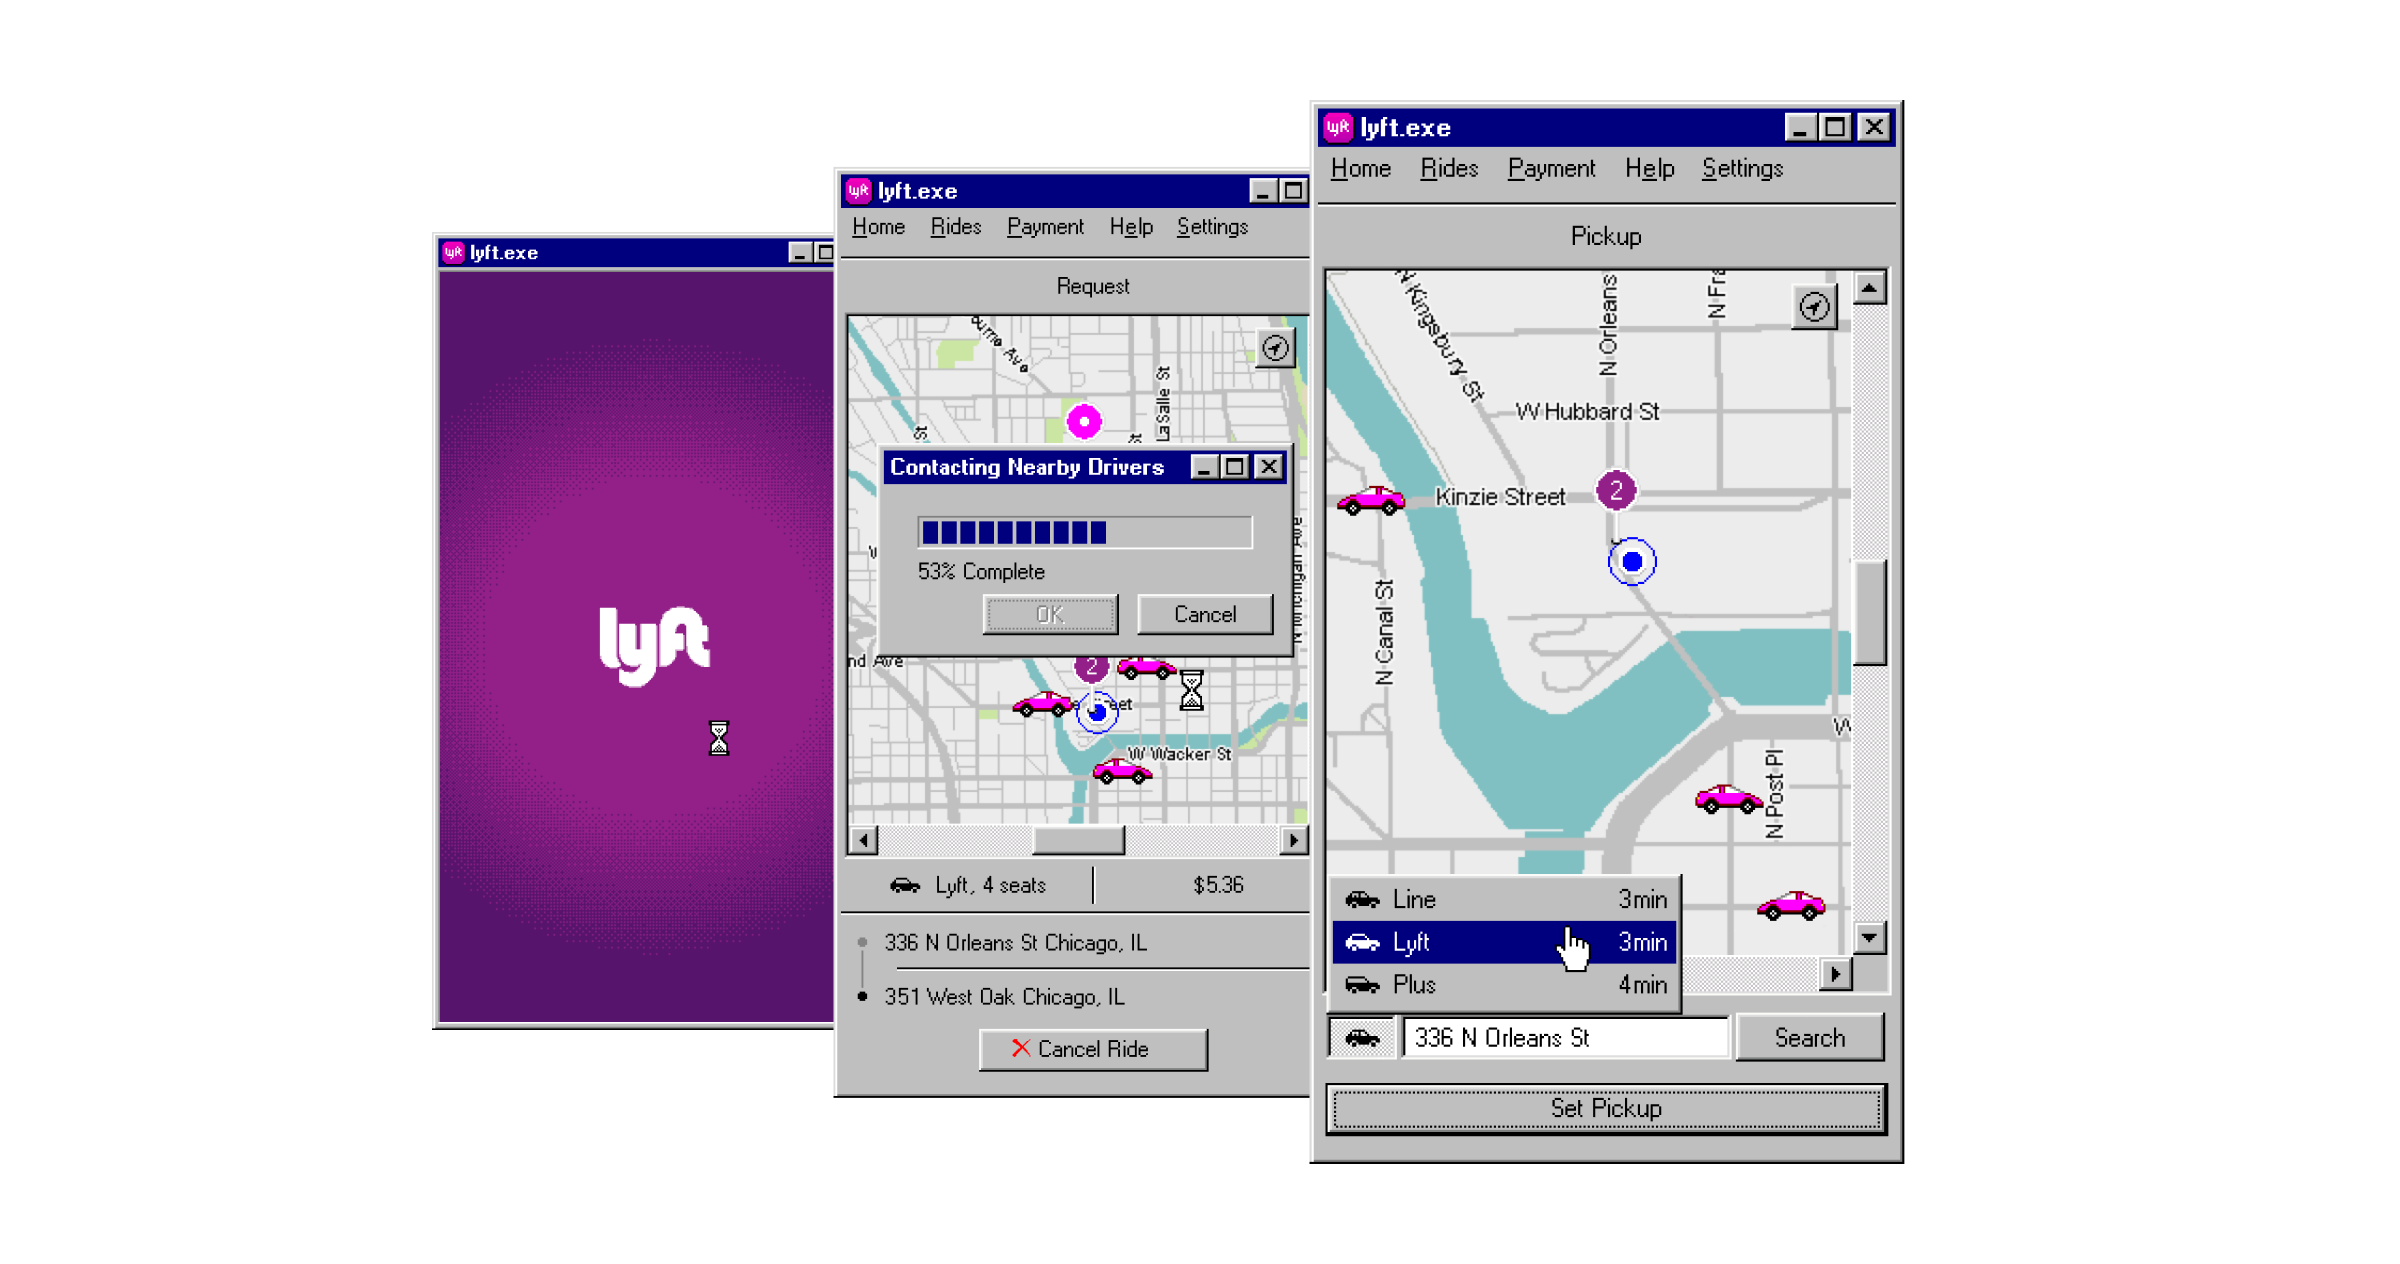 a cover image showing the lyft app redesigned to look like it's for Windows 95